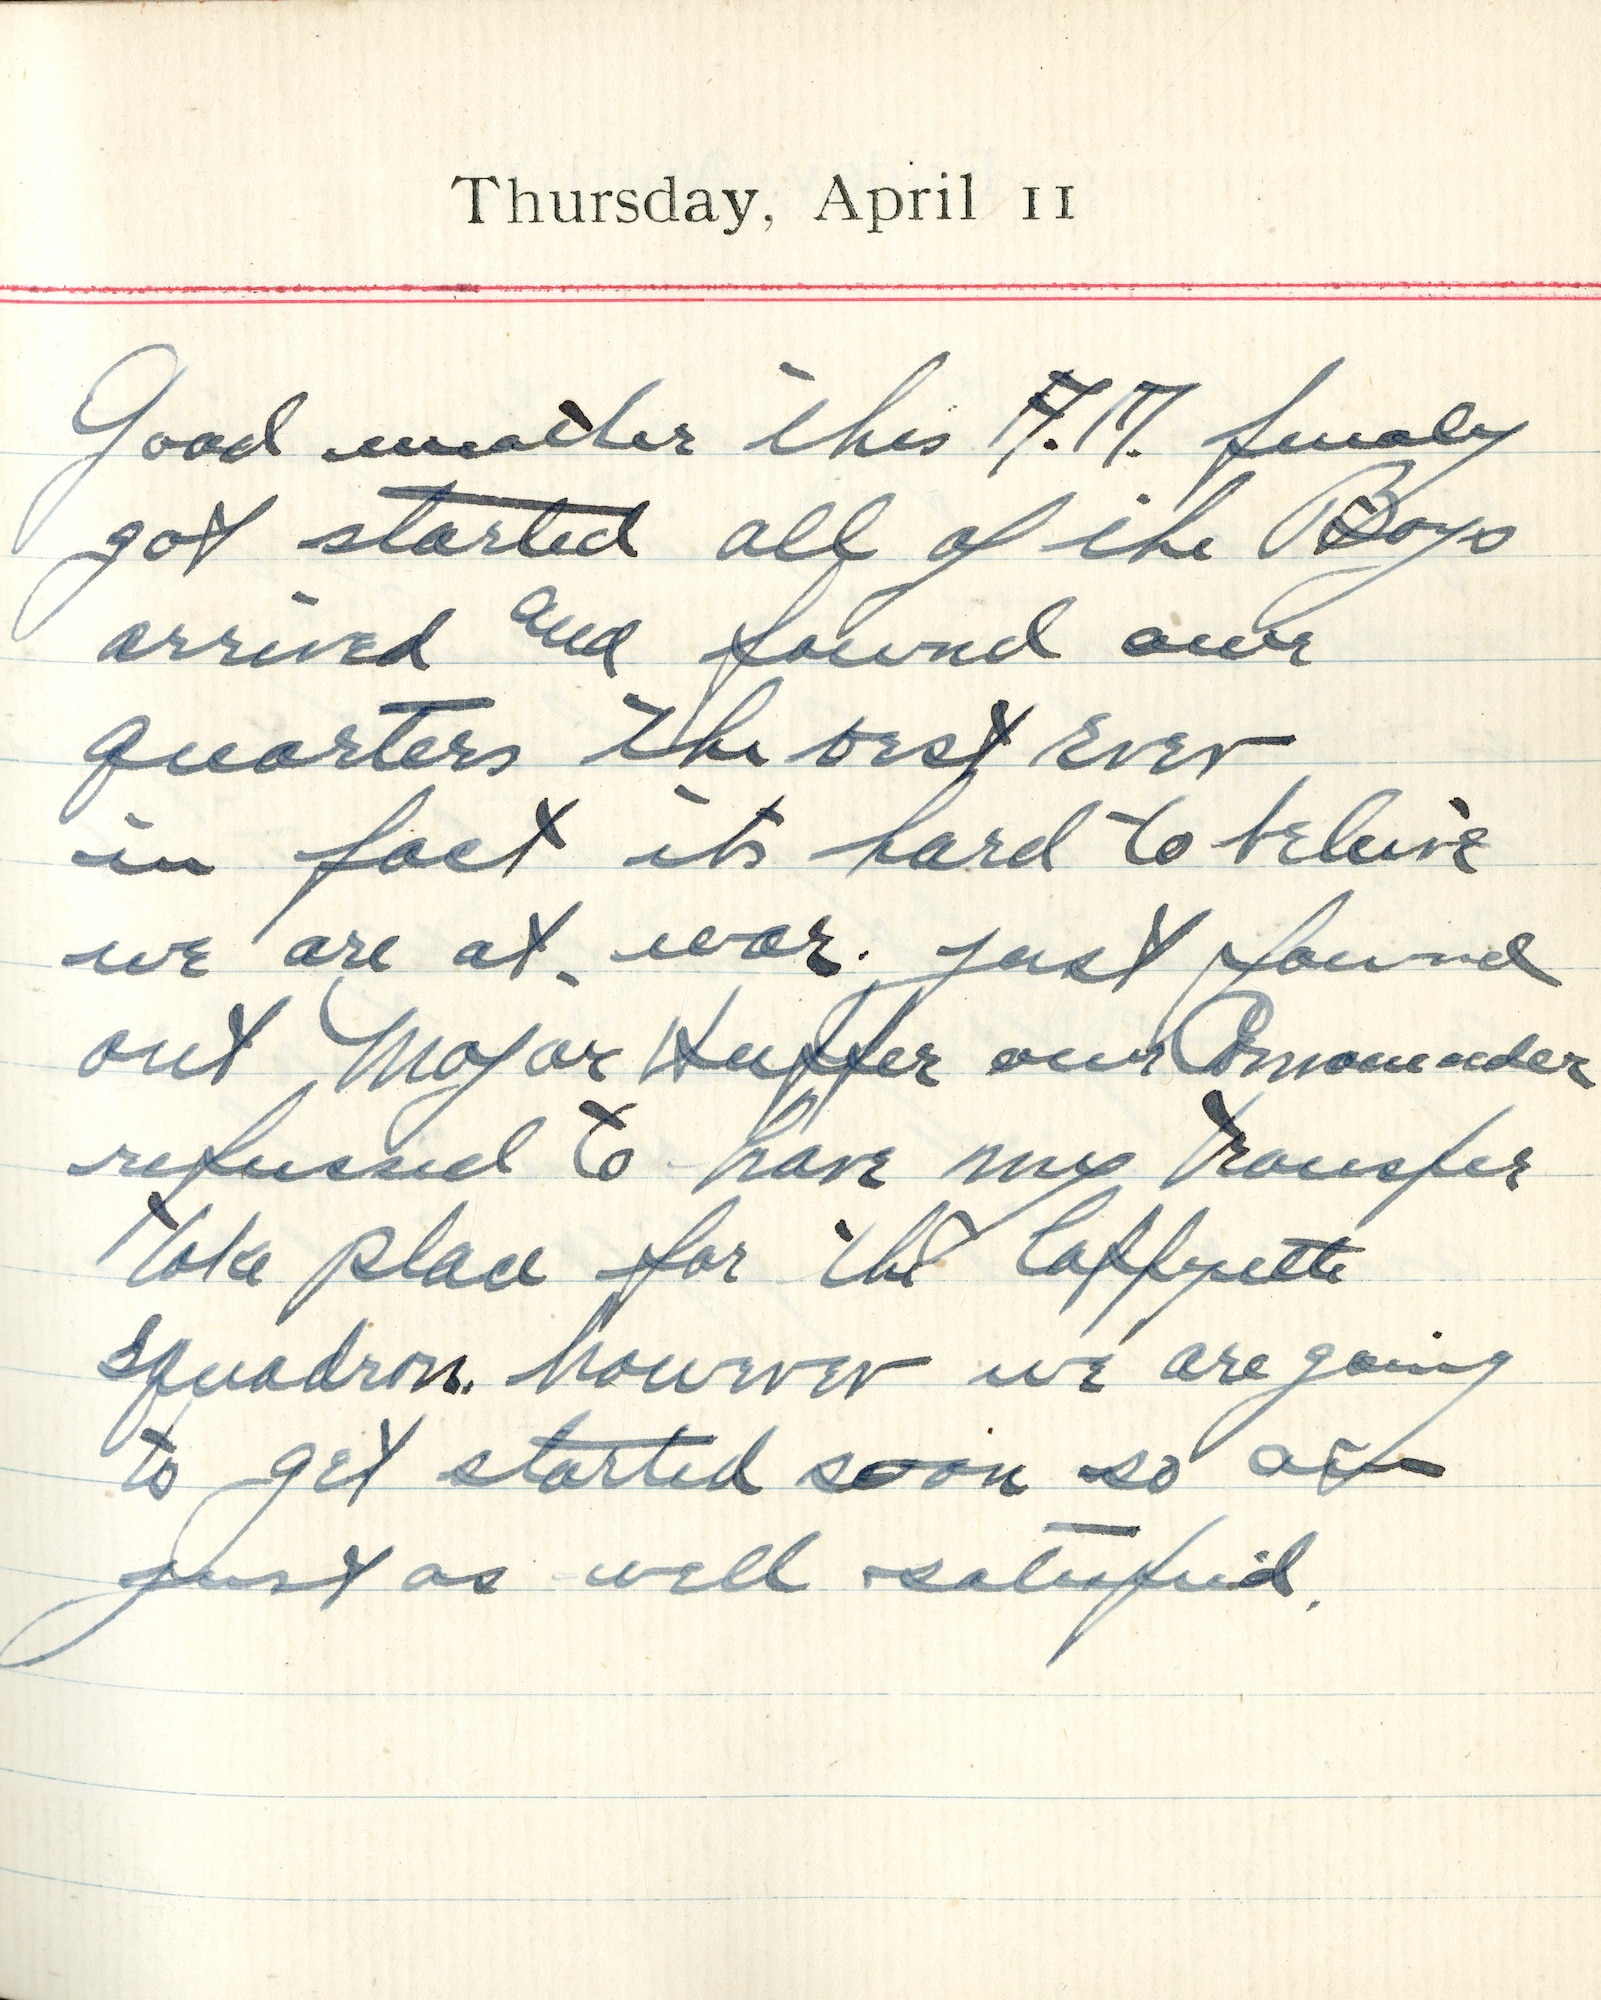 Capt. Edward V. Rickenbacker's 1918 wartime diary entry. (04/11/1918). Good weather this A.M.  Finally got started.  All of the boys arrived and found our quarters.  The best ever in fact.  It’s hard to believe we are at war.  Just found out Major Huffer our Commander refused to have my transfer take place for the Lafayette squadron, however we are going to get started soon so am just as well satisfied.